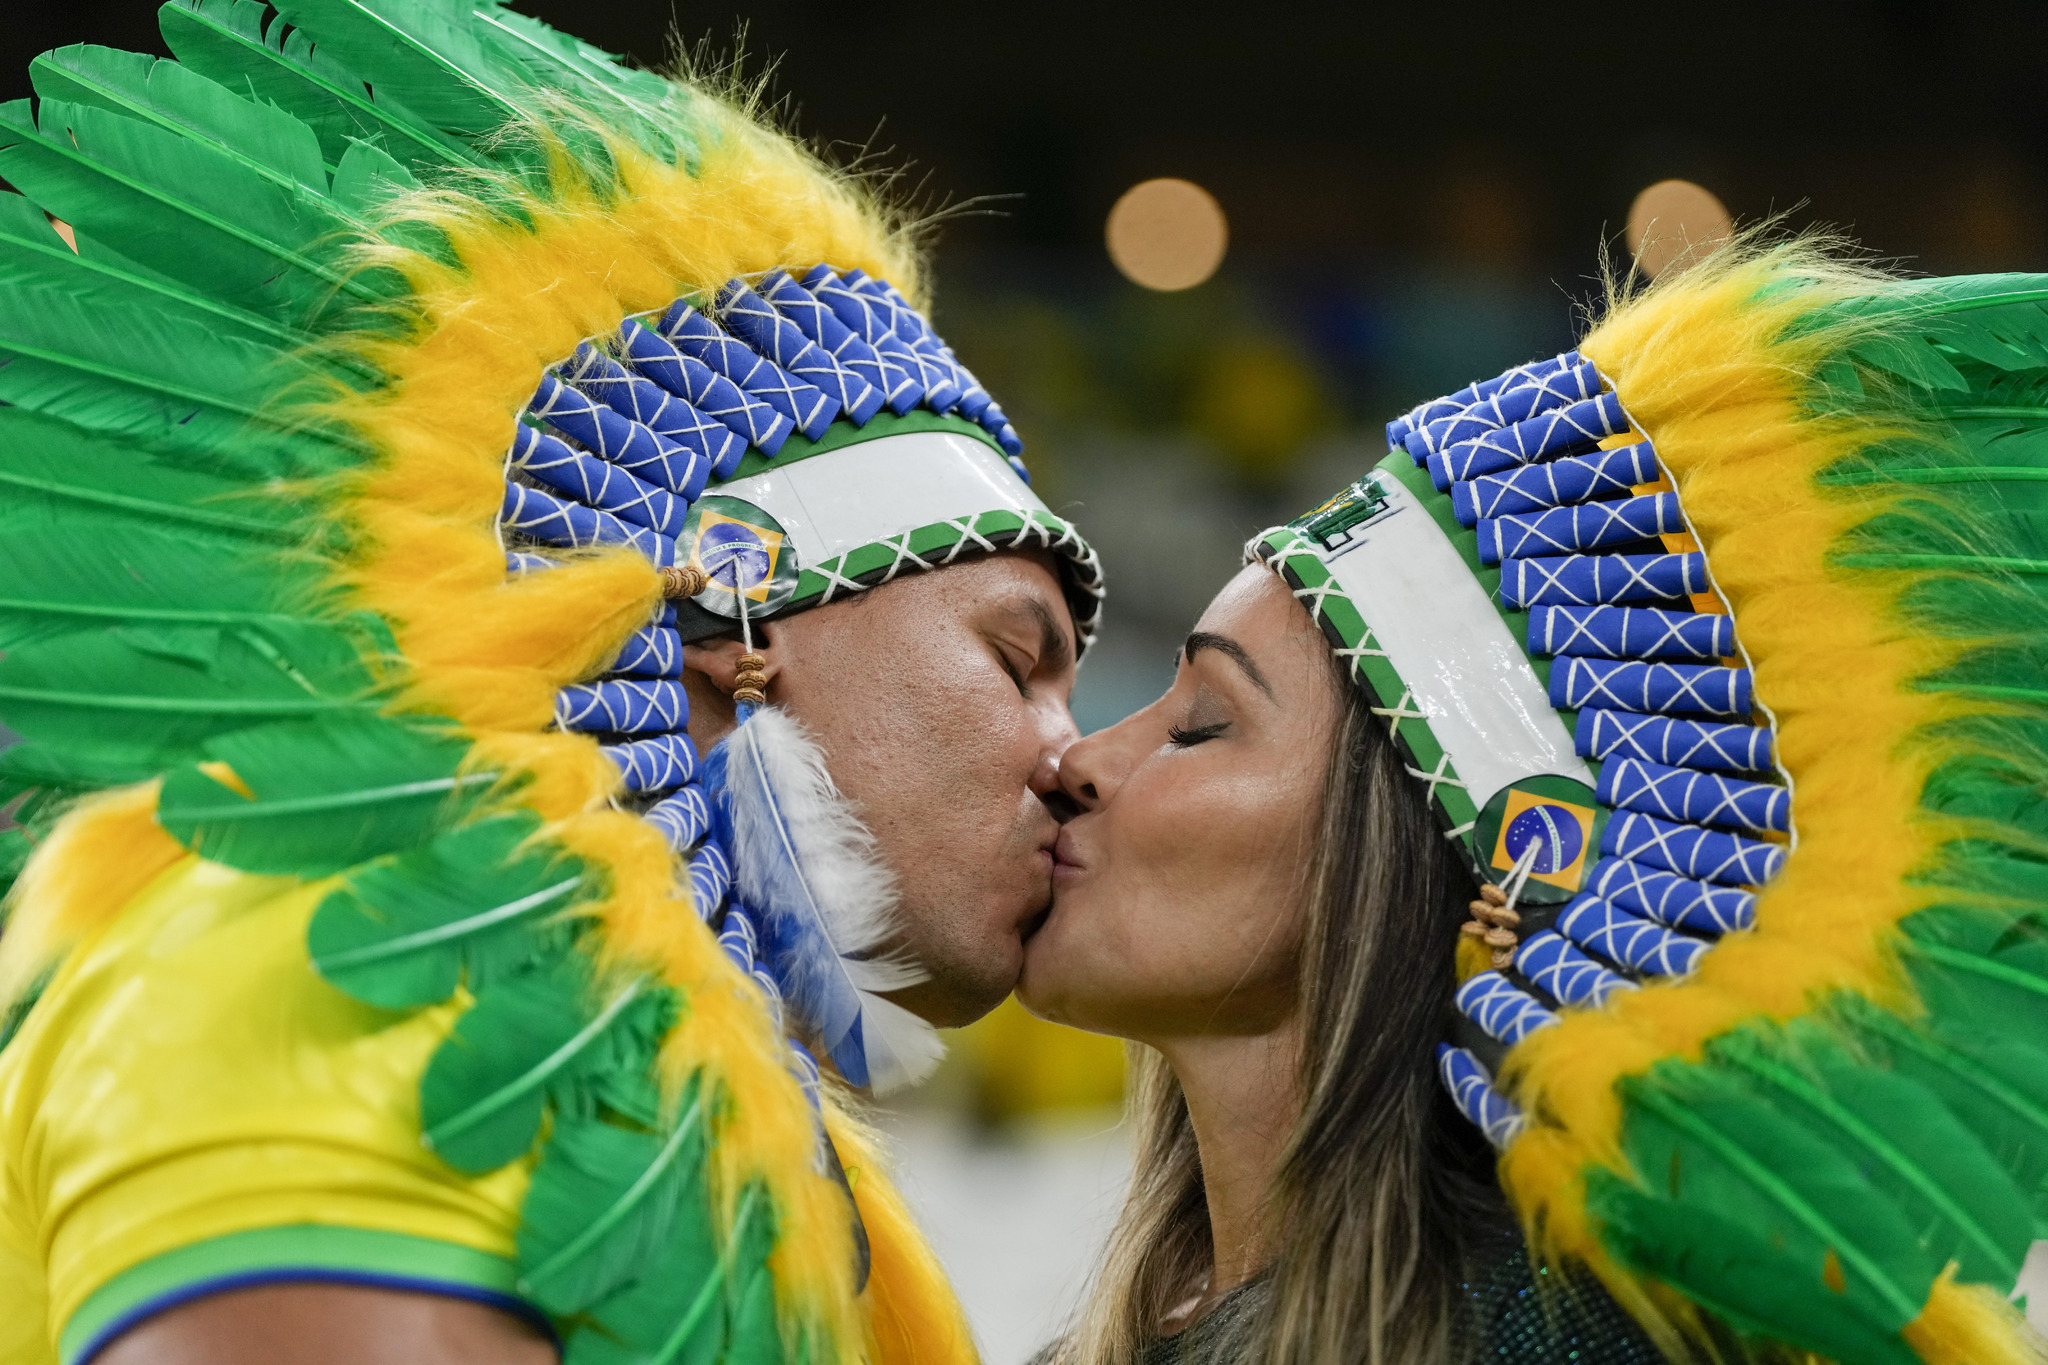  lt;HIT gt;Brazil lt;/HIT gt; soccer team fans kiss ahead of the World Cup group G soccer match between Cameroon and  lt;HIT gt;Brazil lt;/HIT gt;, at the Lusail Stadium in Lusail, Qatar, Friday, Dec. 2, 2022. (AP Photo/Frank Augstein)